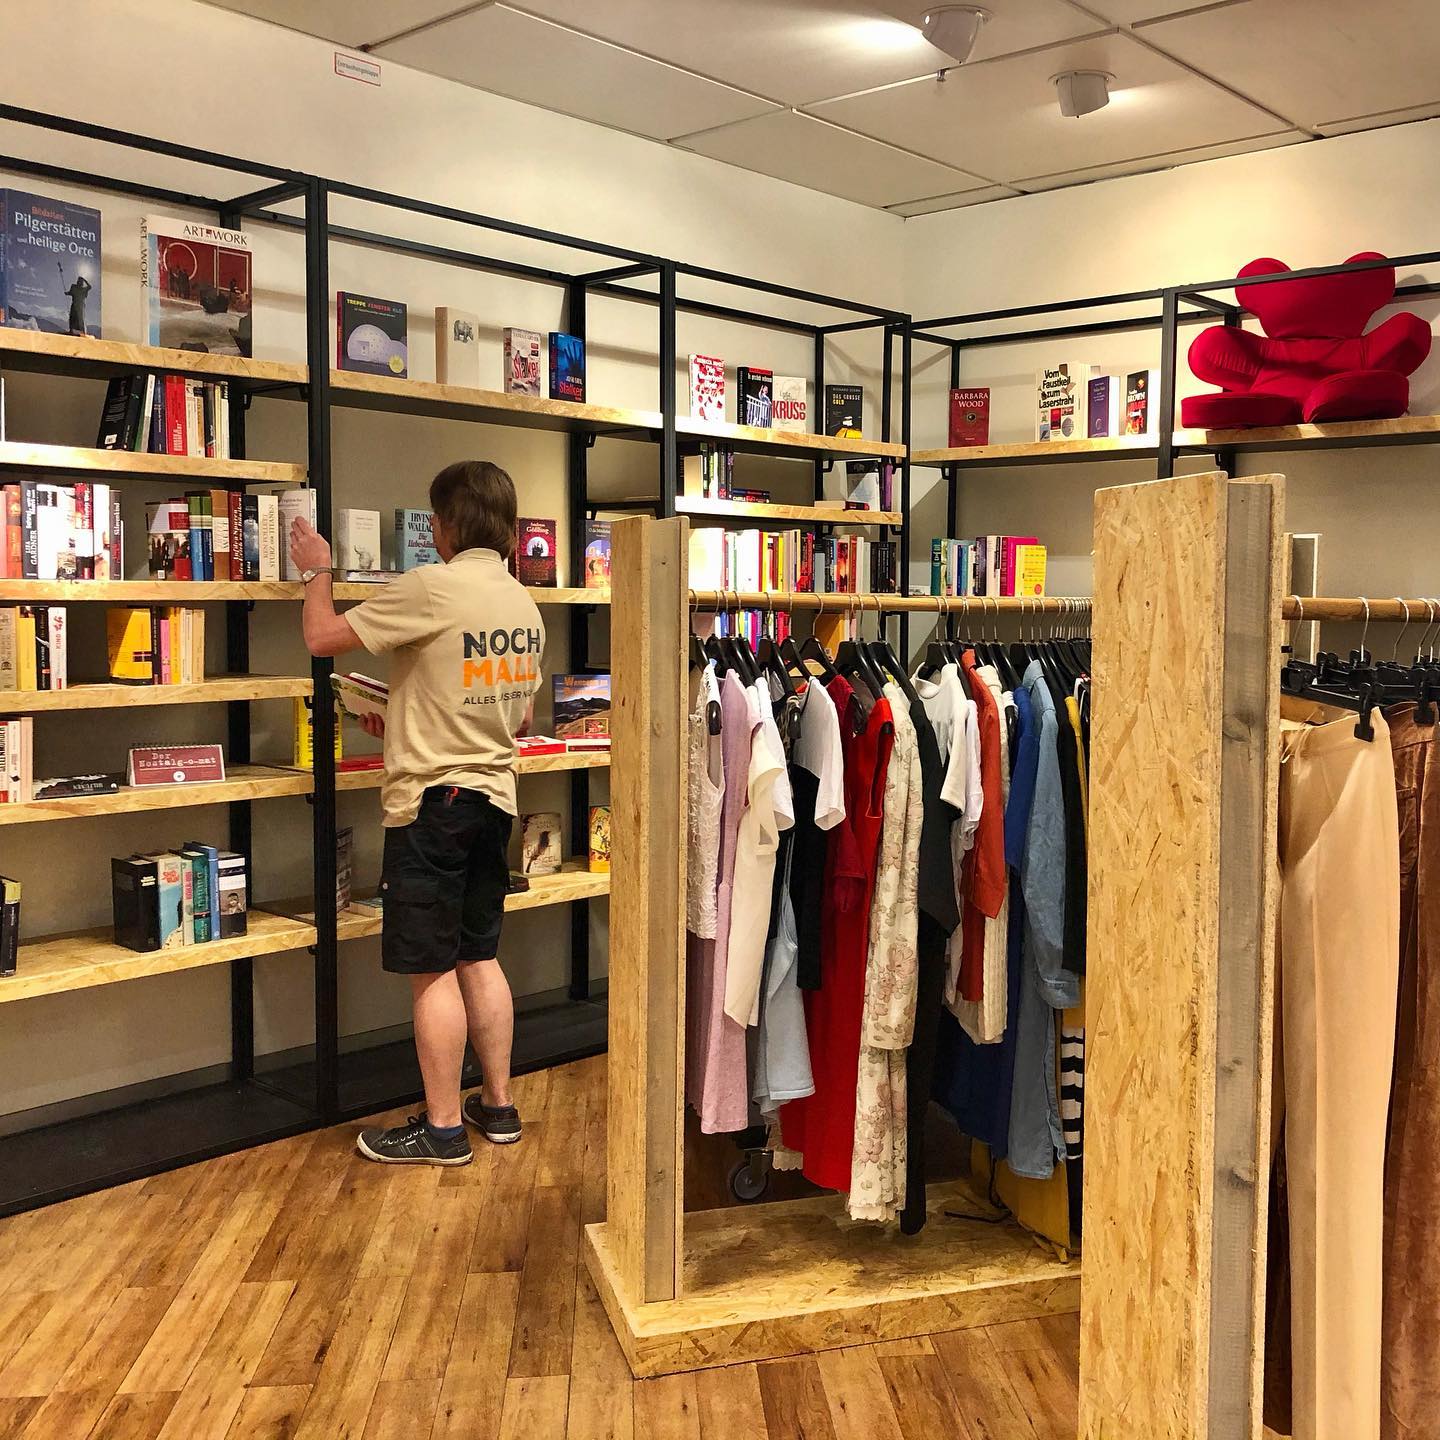 The pop-up shop will be open on the third floor of the city’s Karstadt Hermannplatz department store, in the hip Kreuzberg district, for the next six months. If the pilot project works, more stores are planned.